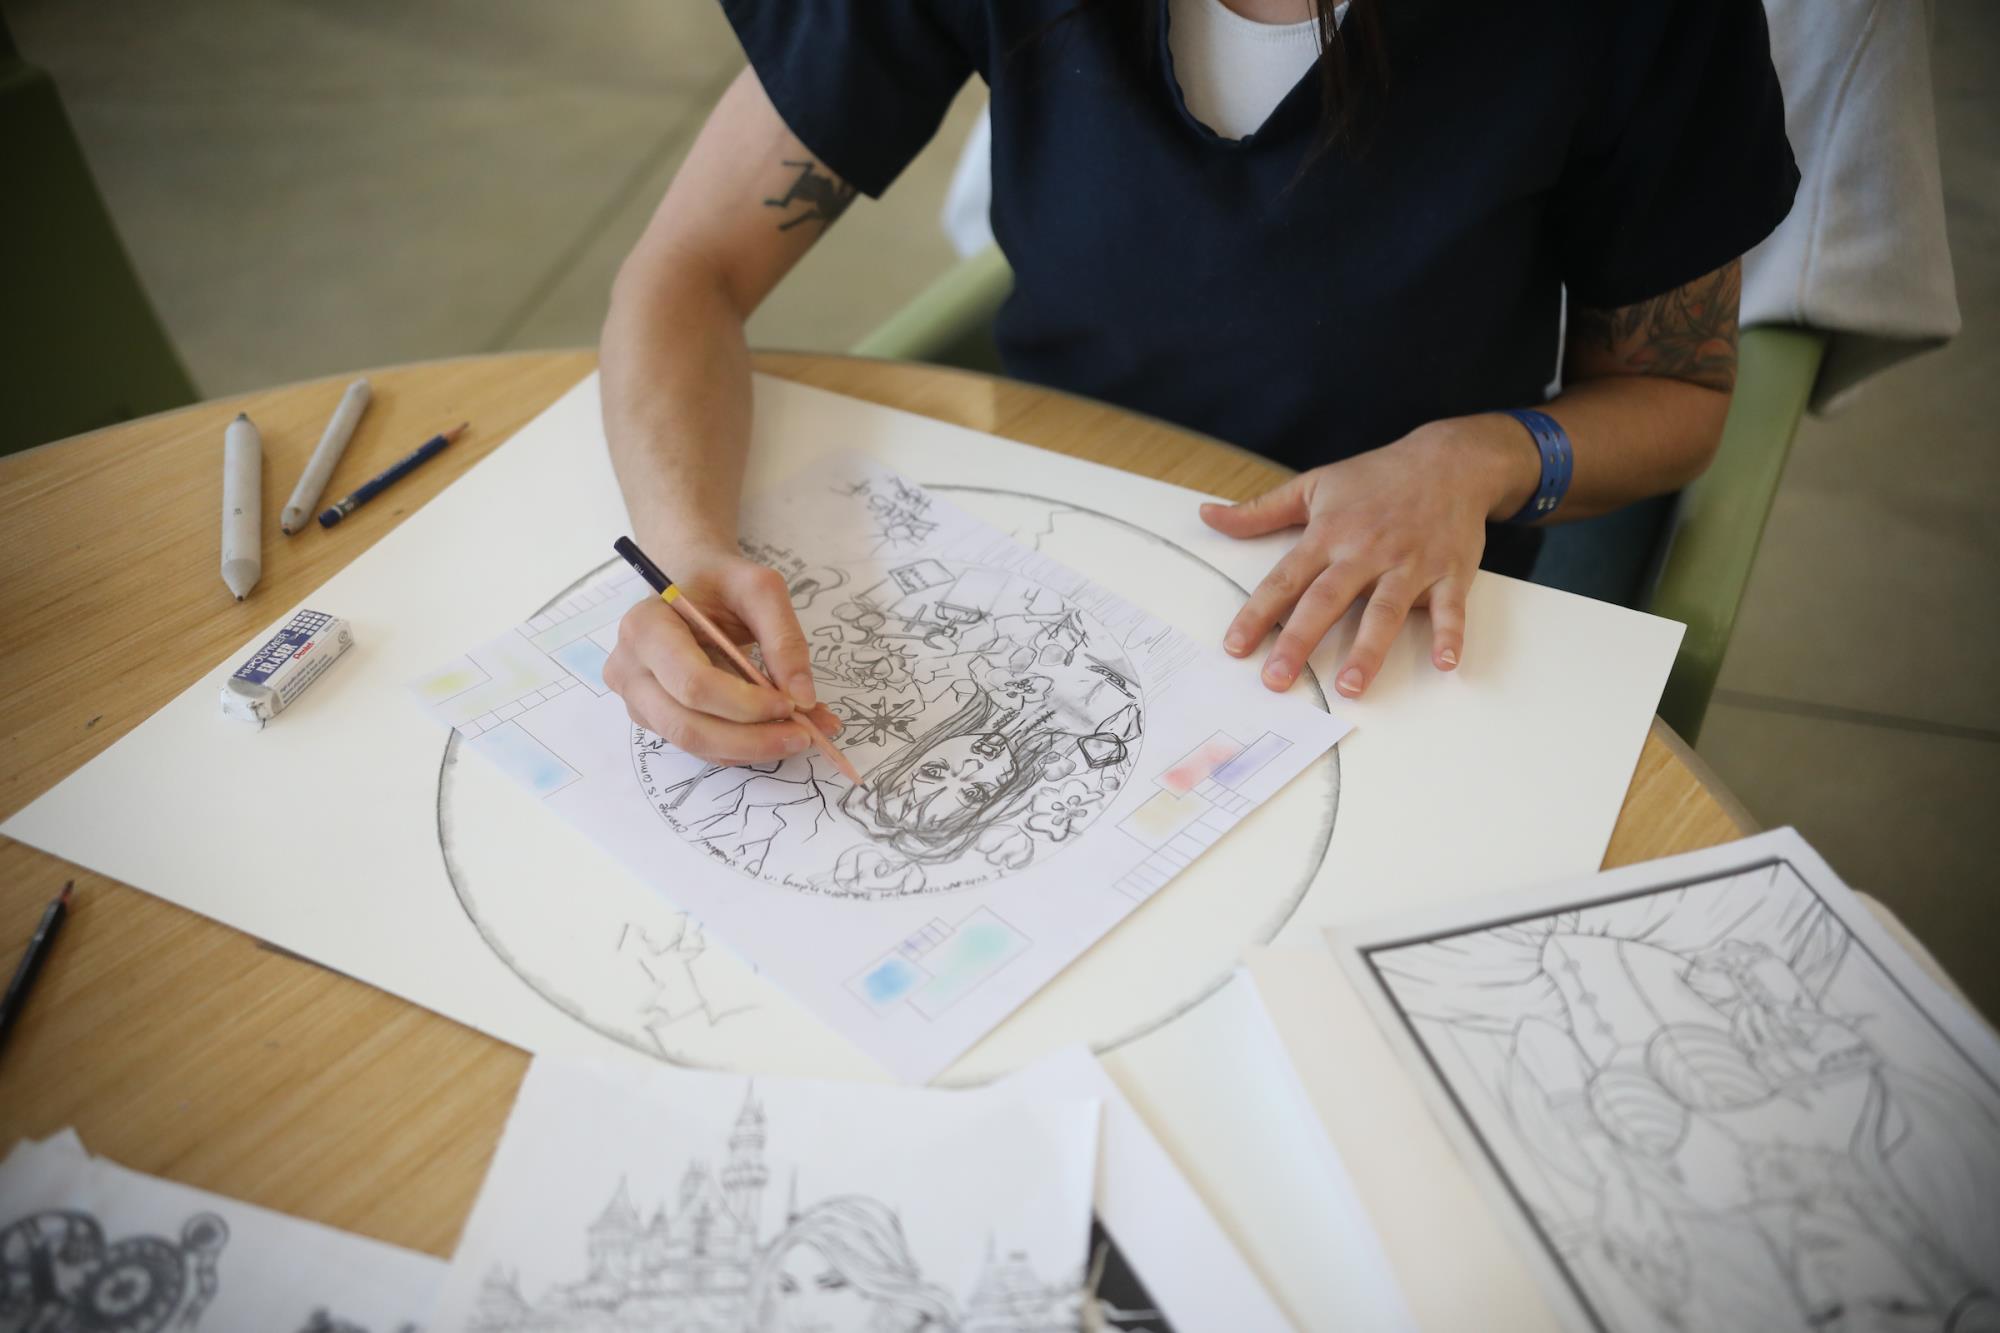 Student drawing a picture in art class